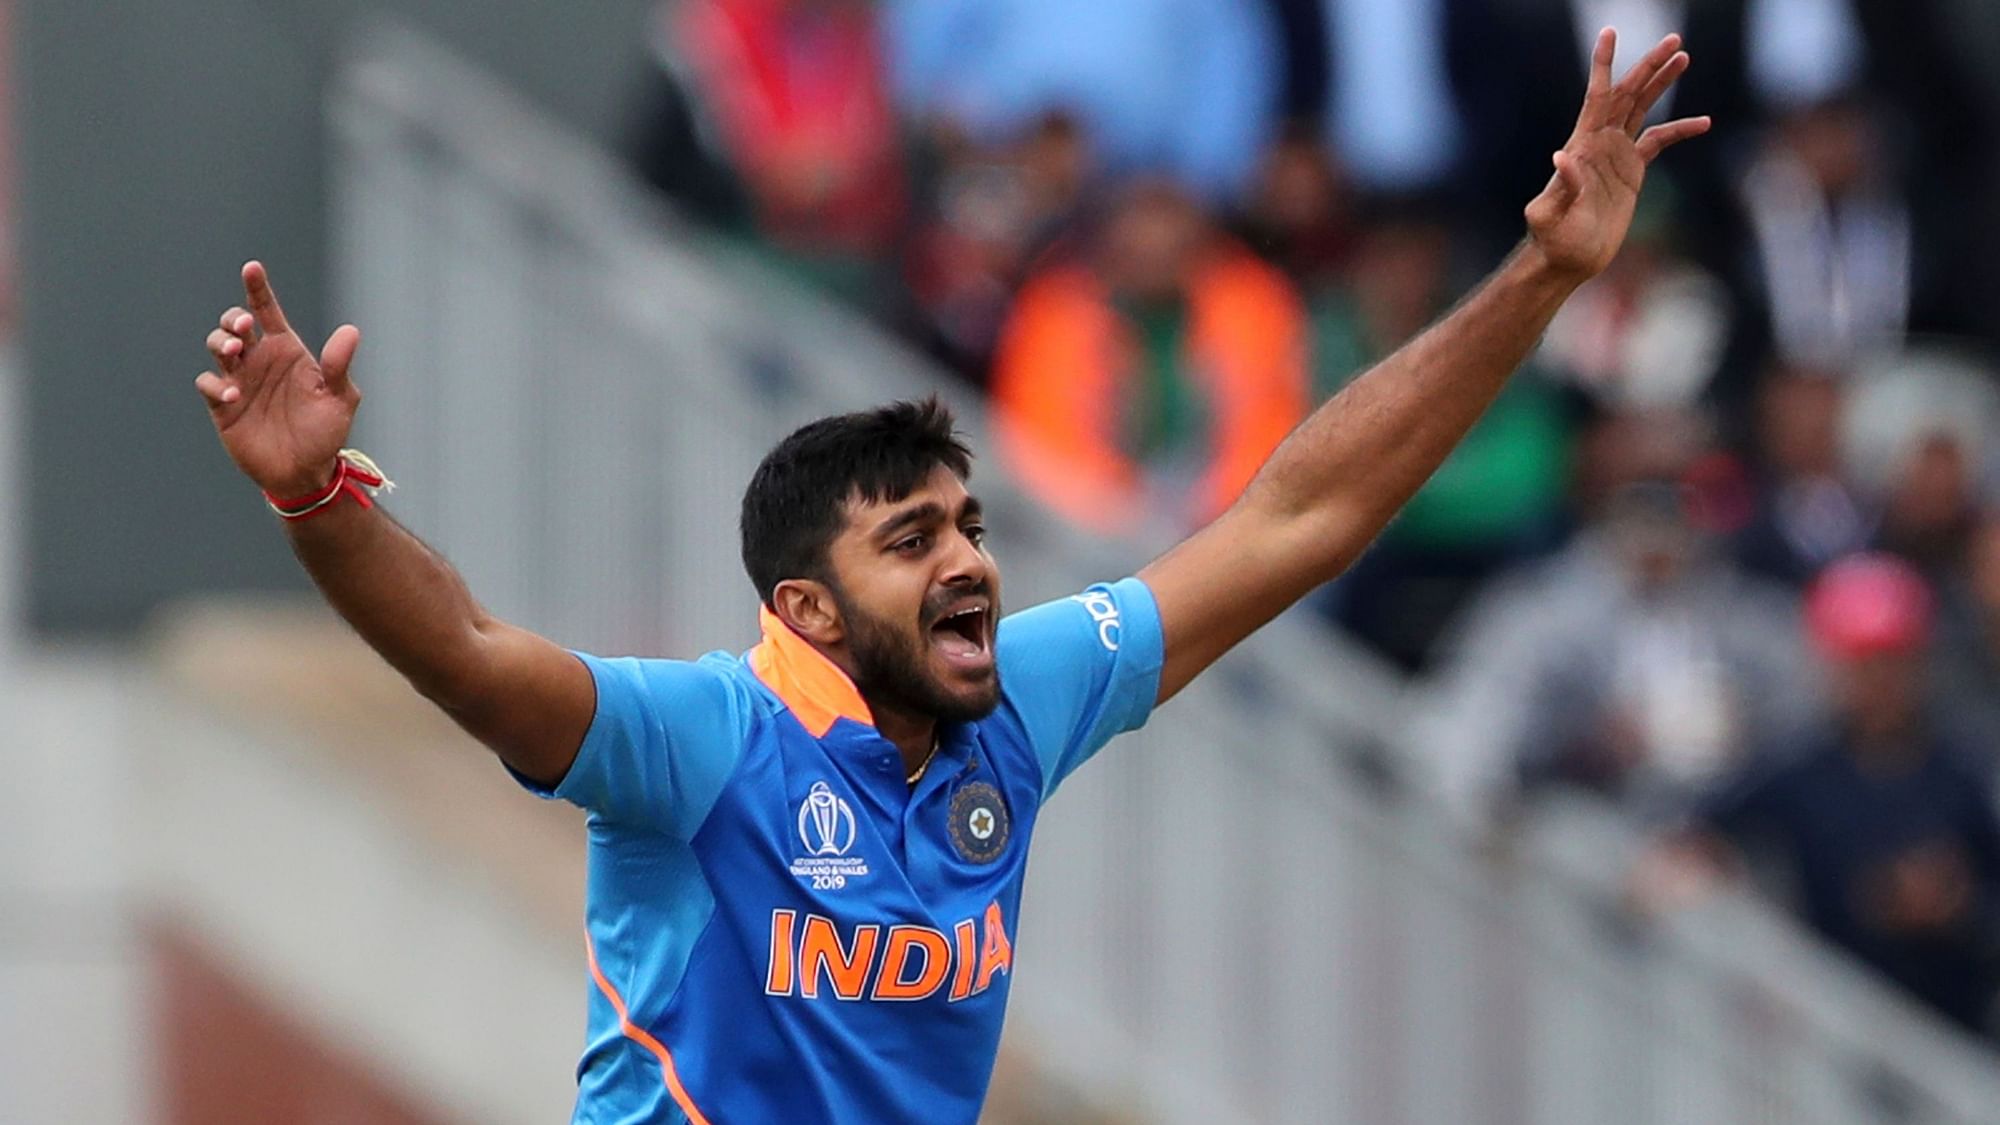 Vijay Shankar made his presence felt on his World Cup debut with two crucial Pakistani wickets.